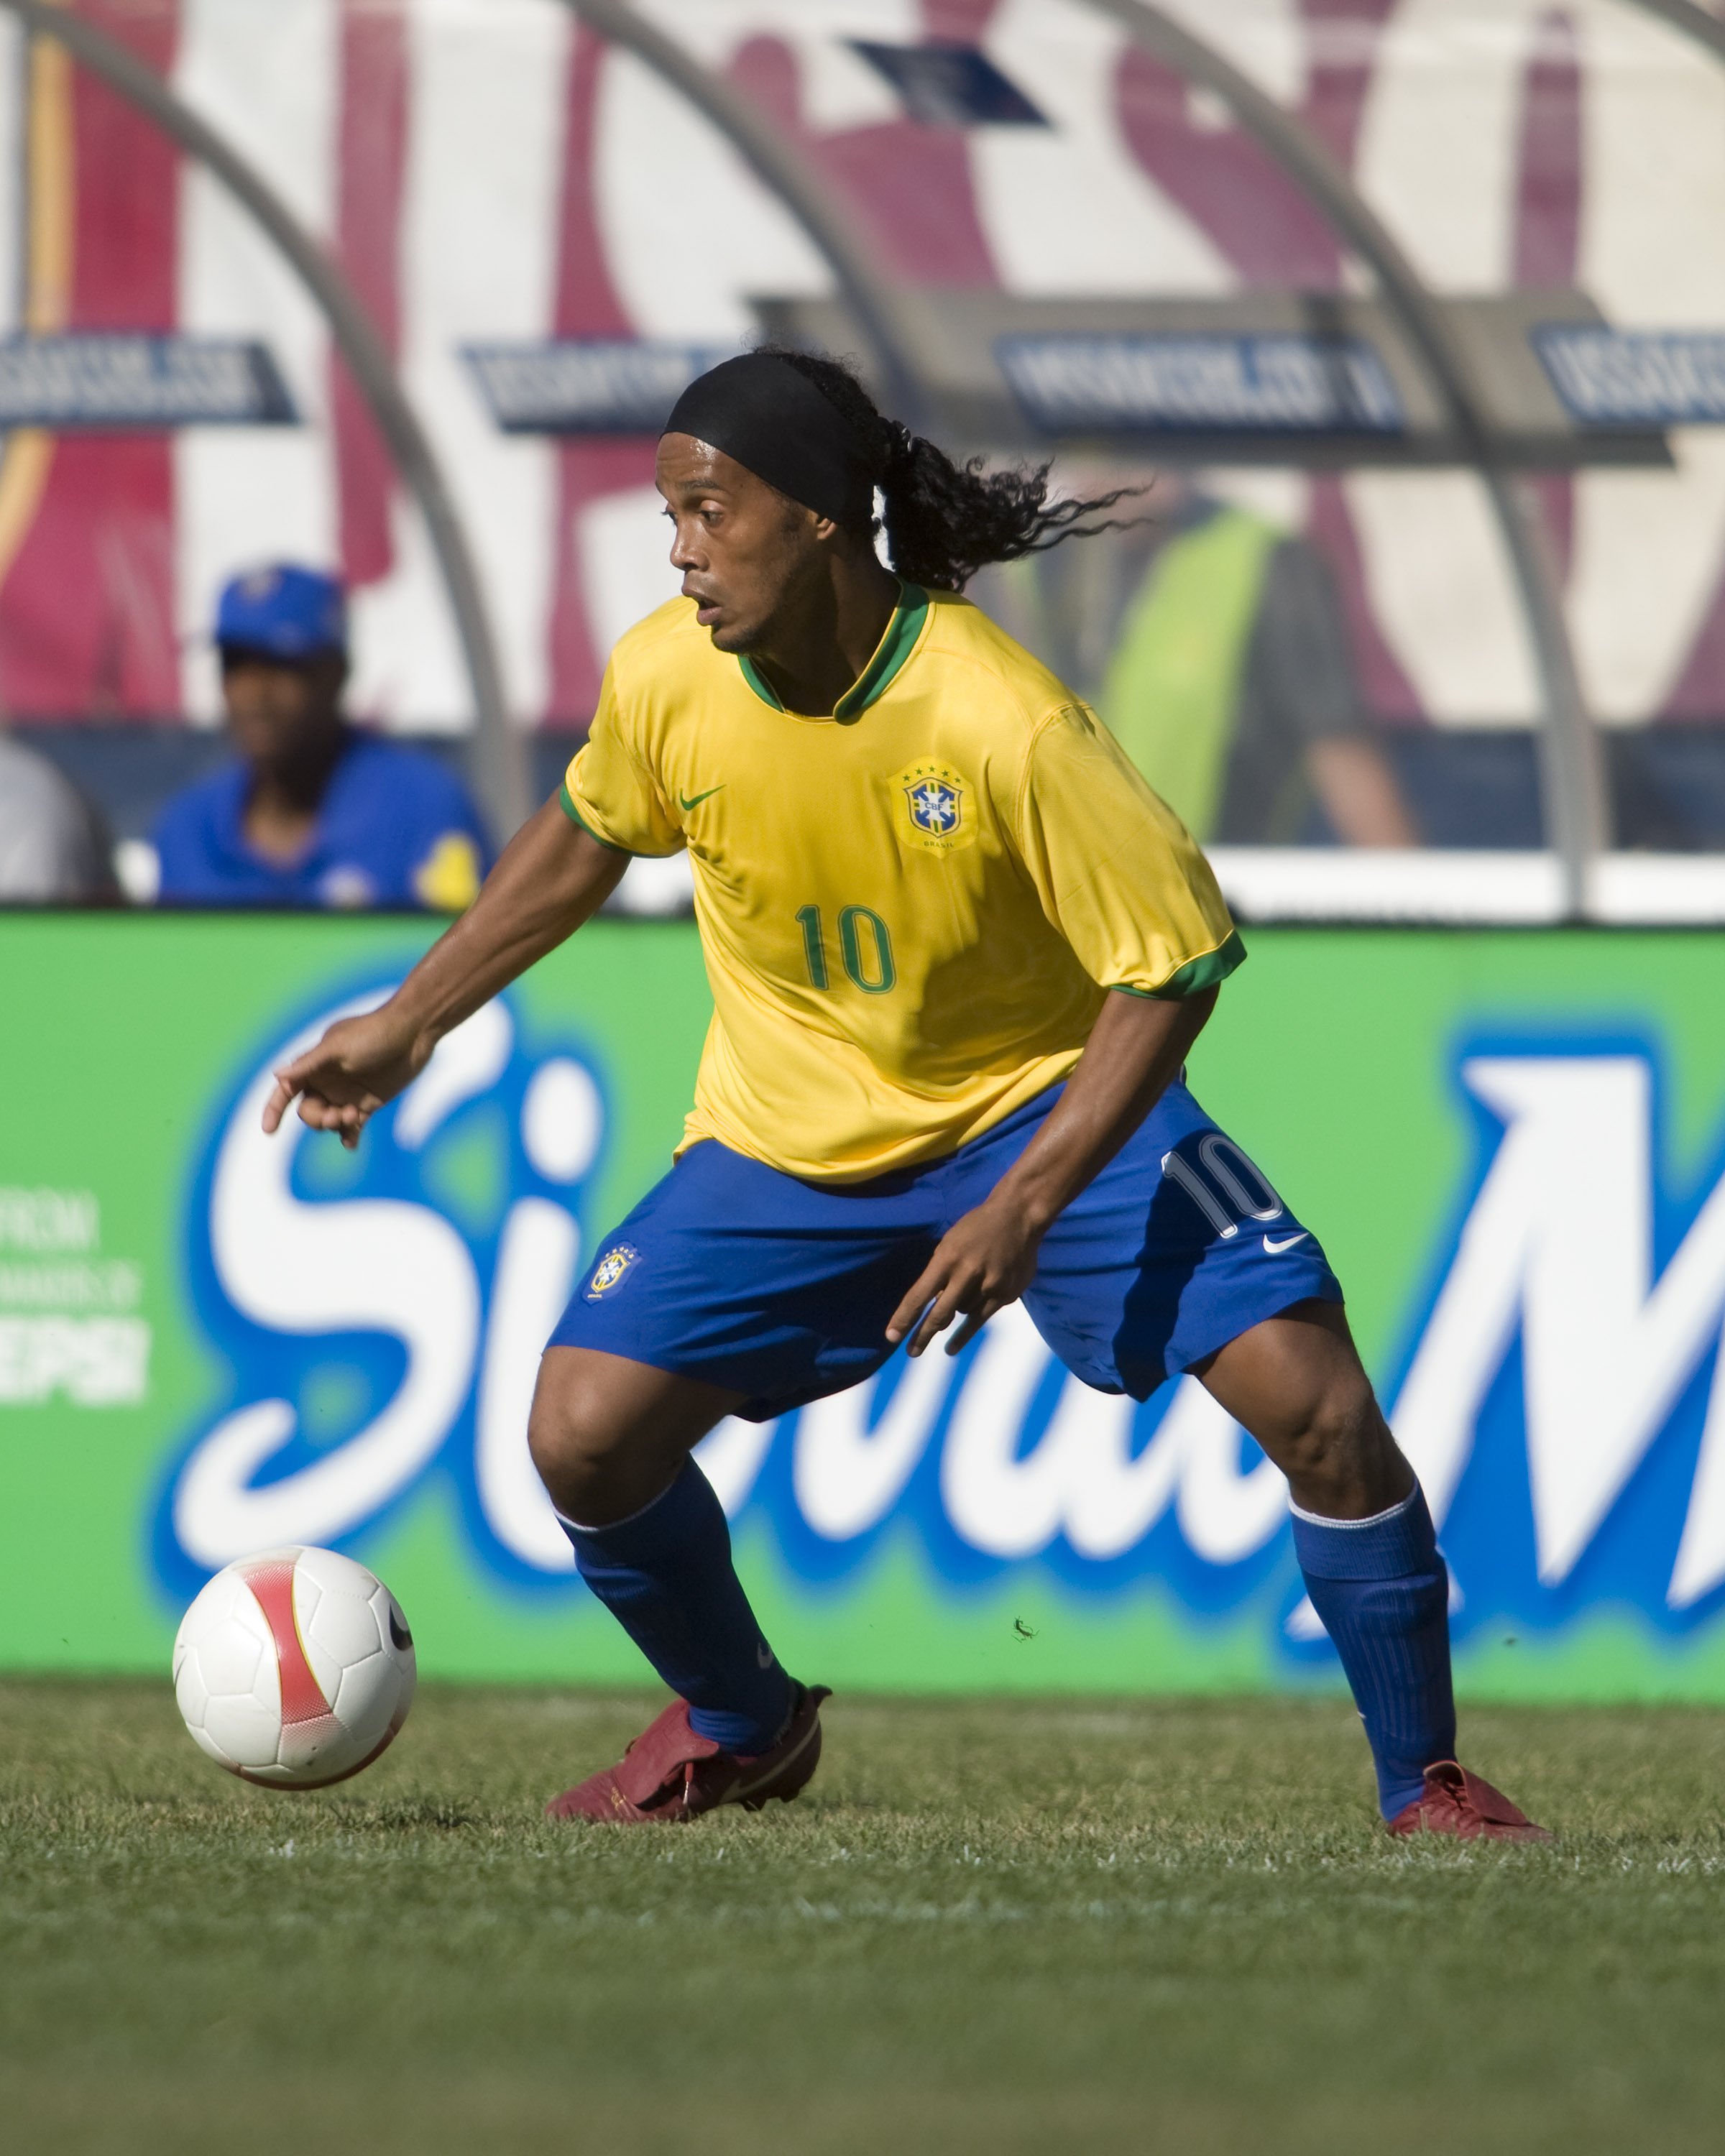 Why was Ronaldinho not called up for FIFA World Cup 2010? - Quora